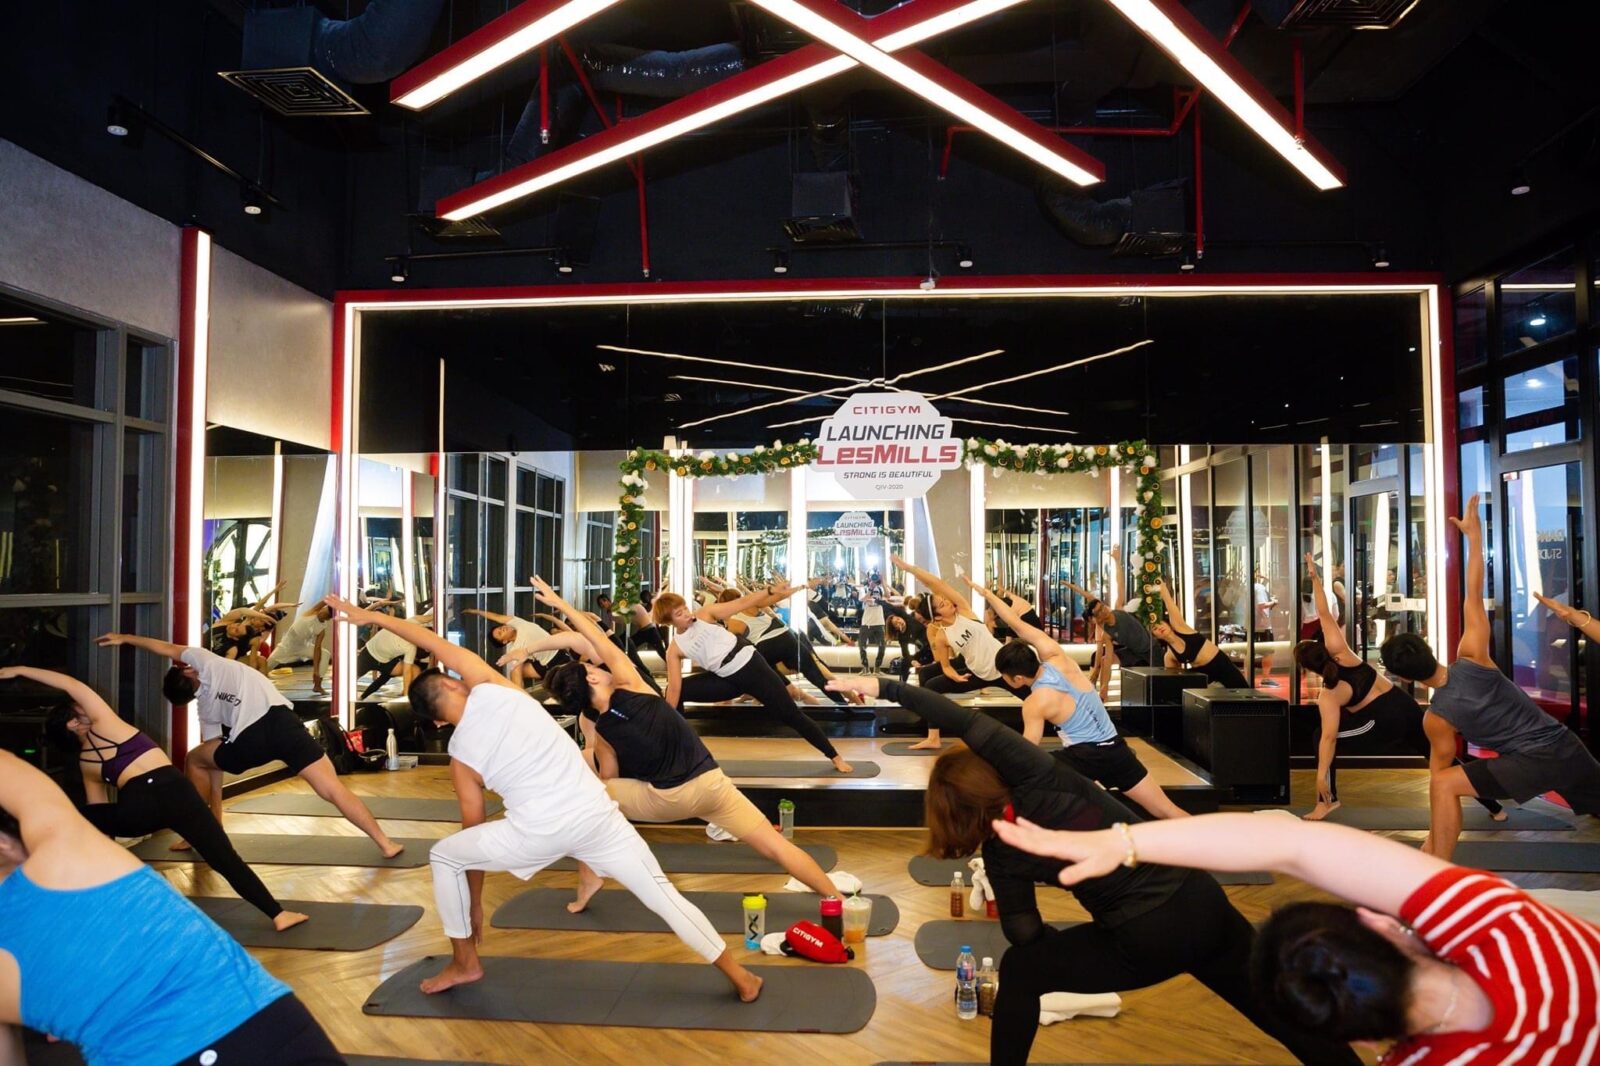 A room full of people who are stretching in their yoga attire at Les Mills Studio in Kuala Lumpur, Malaysia